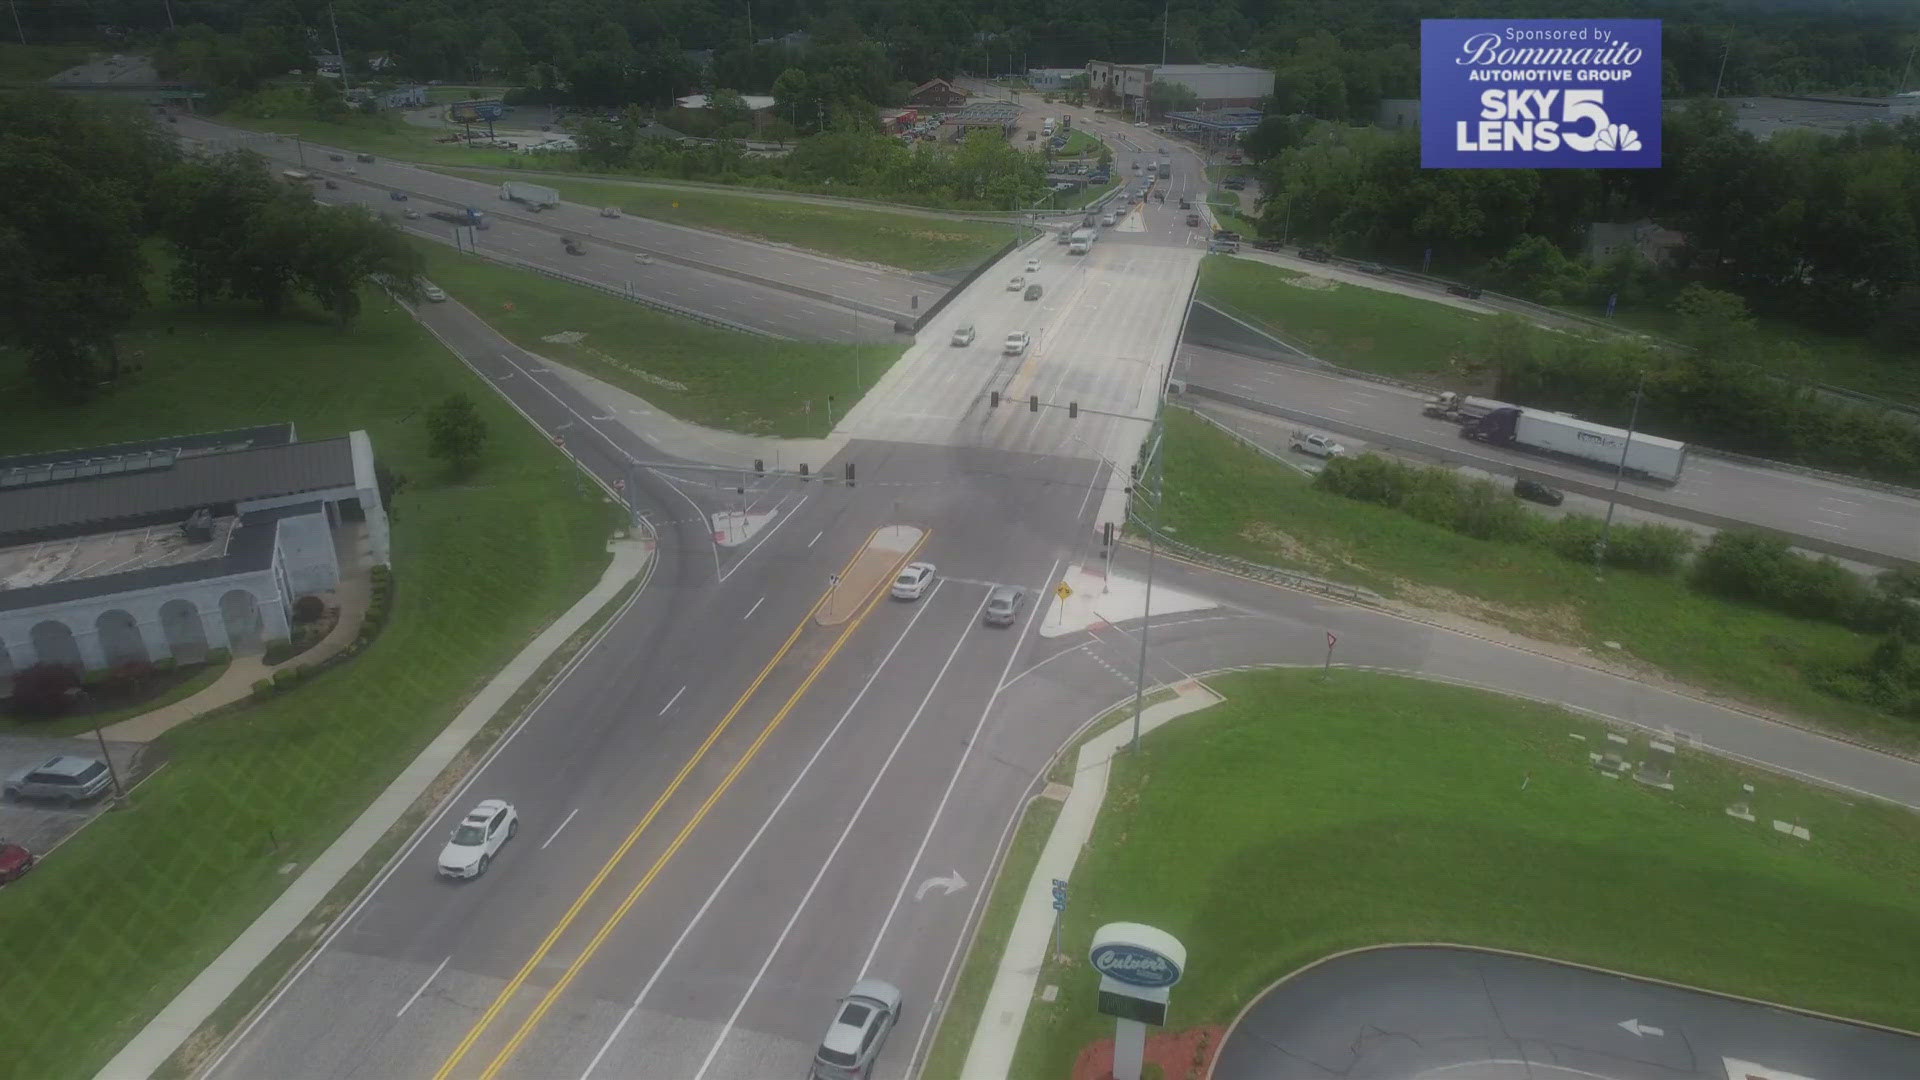 Viewers have reached out with concerns about drivers near Interstate 44. We have passed this issues along to MoDOT.